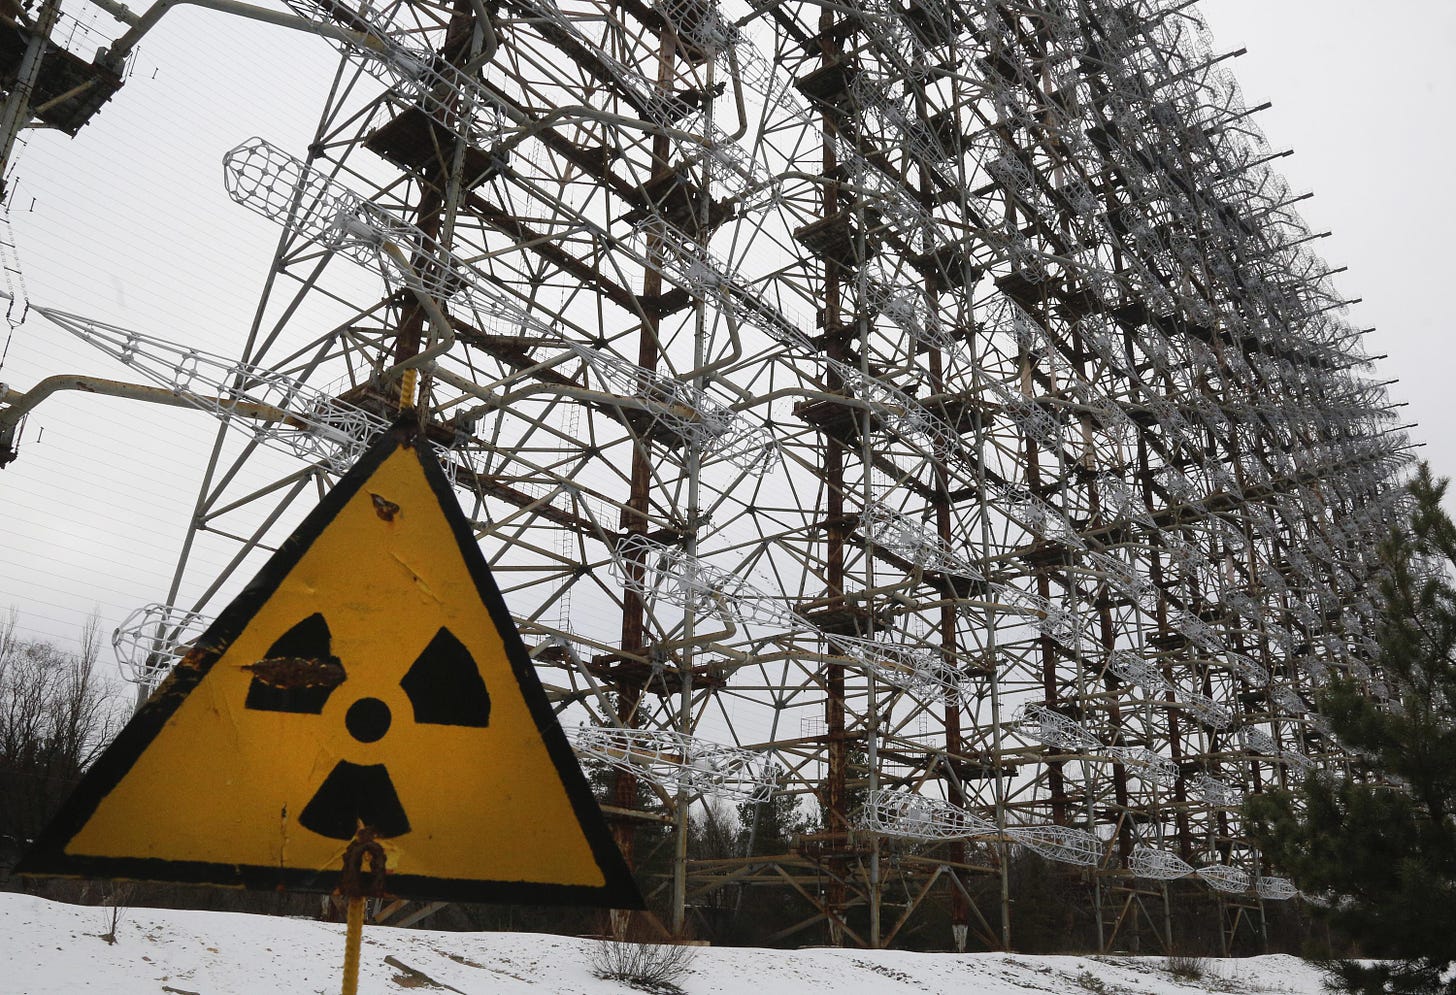 Chernobyl no-go zone targeted as Russia invades Ukraine | AP News